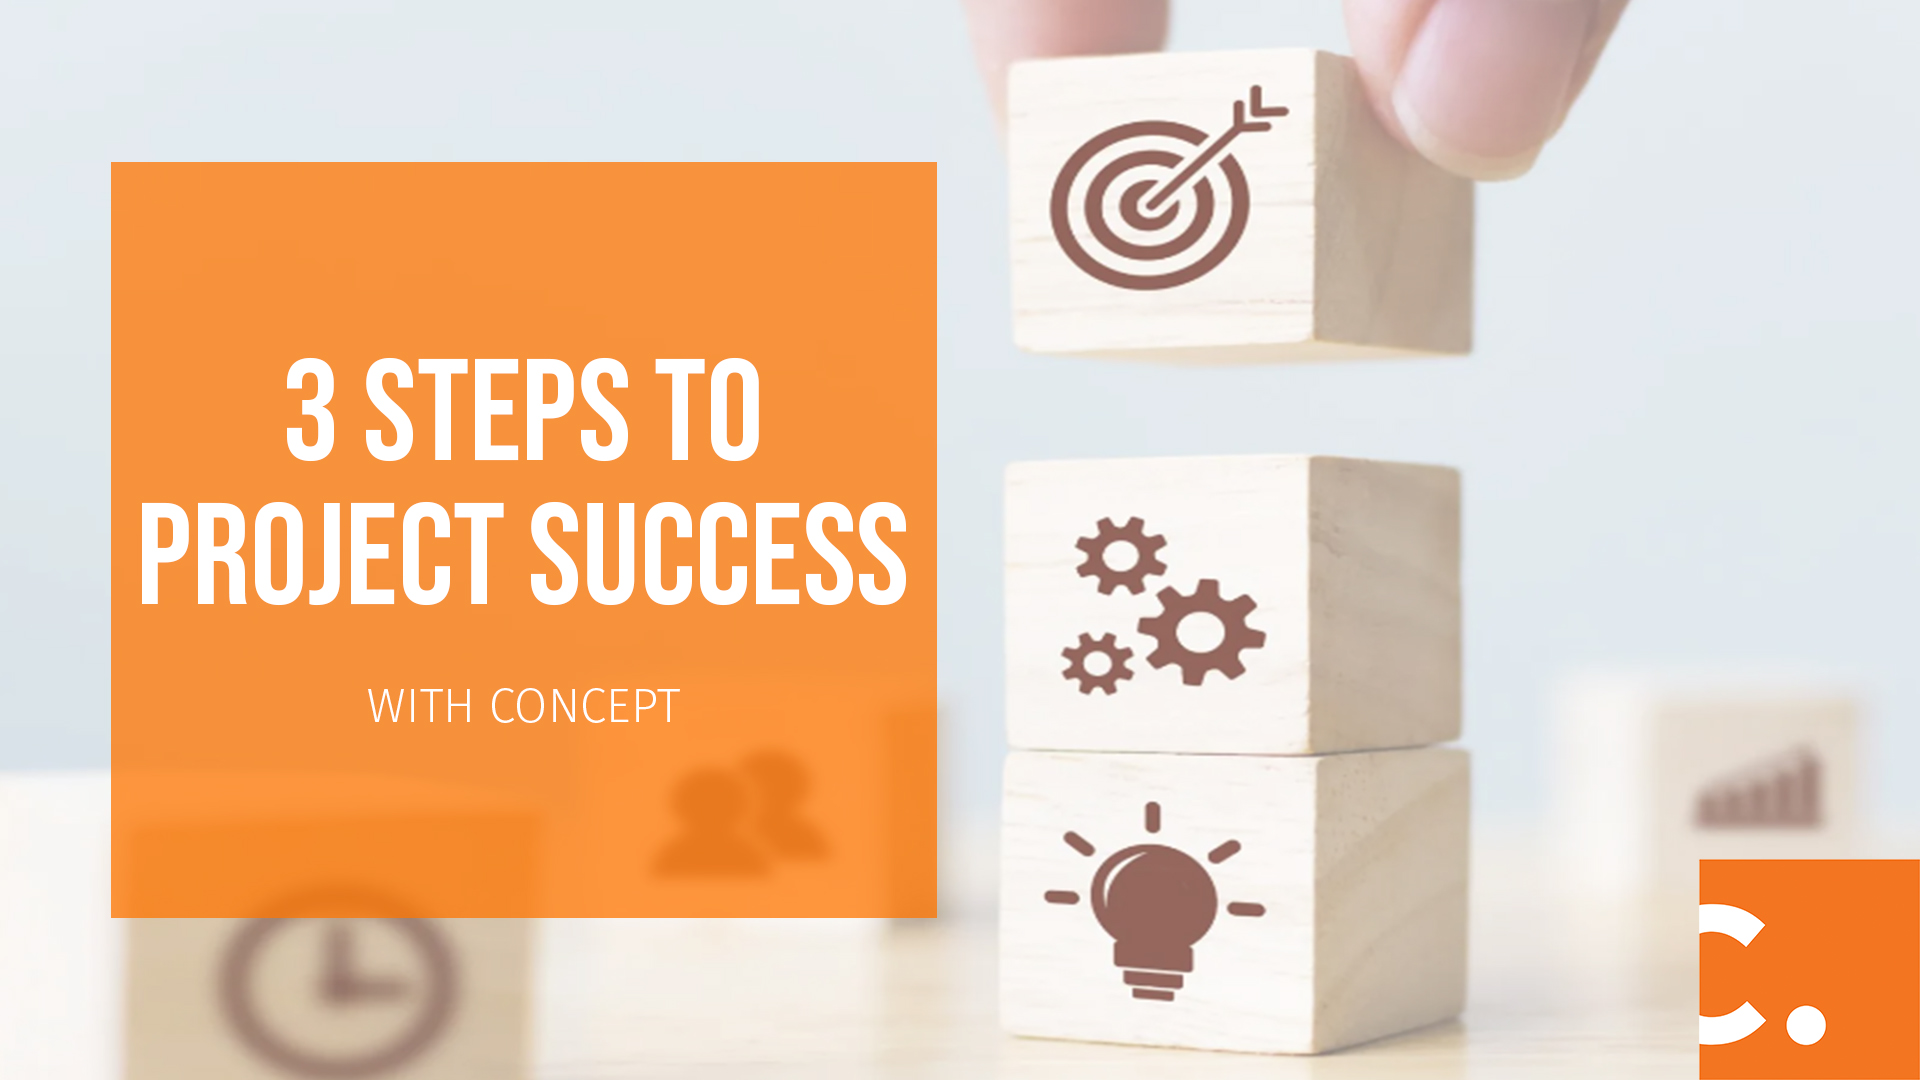 3 Steps to Project Success with Concept